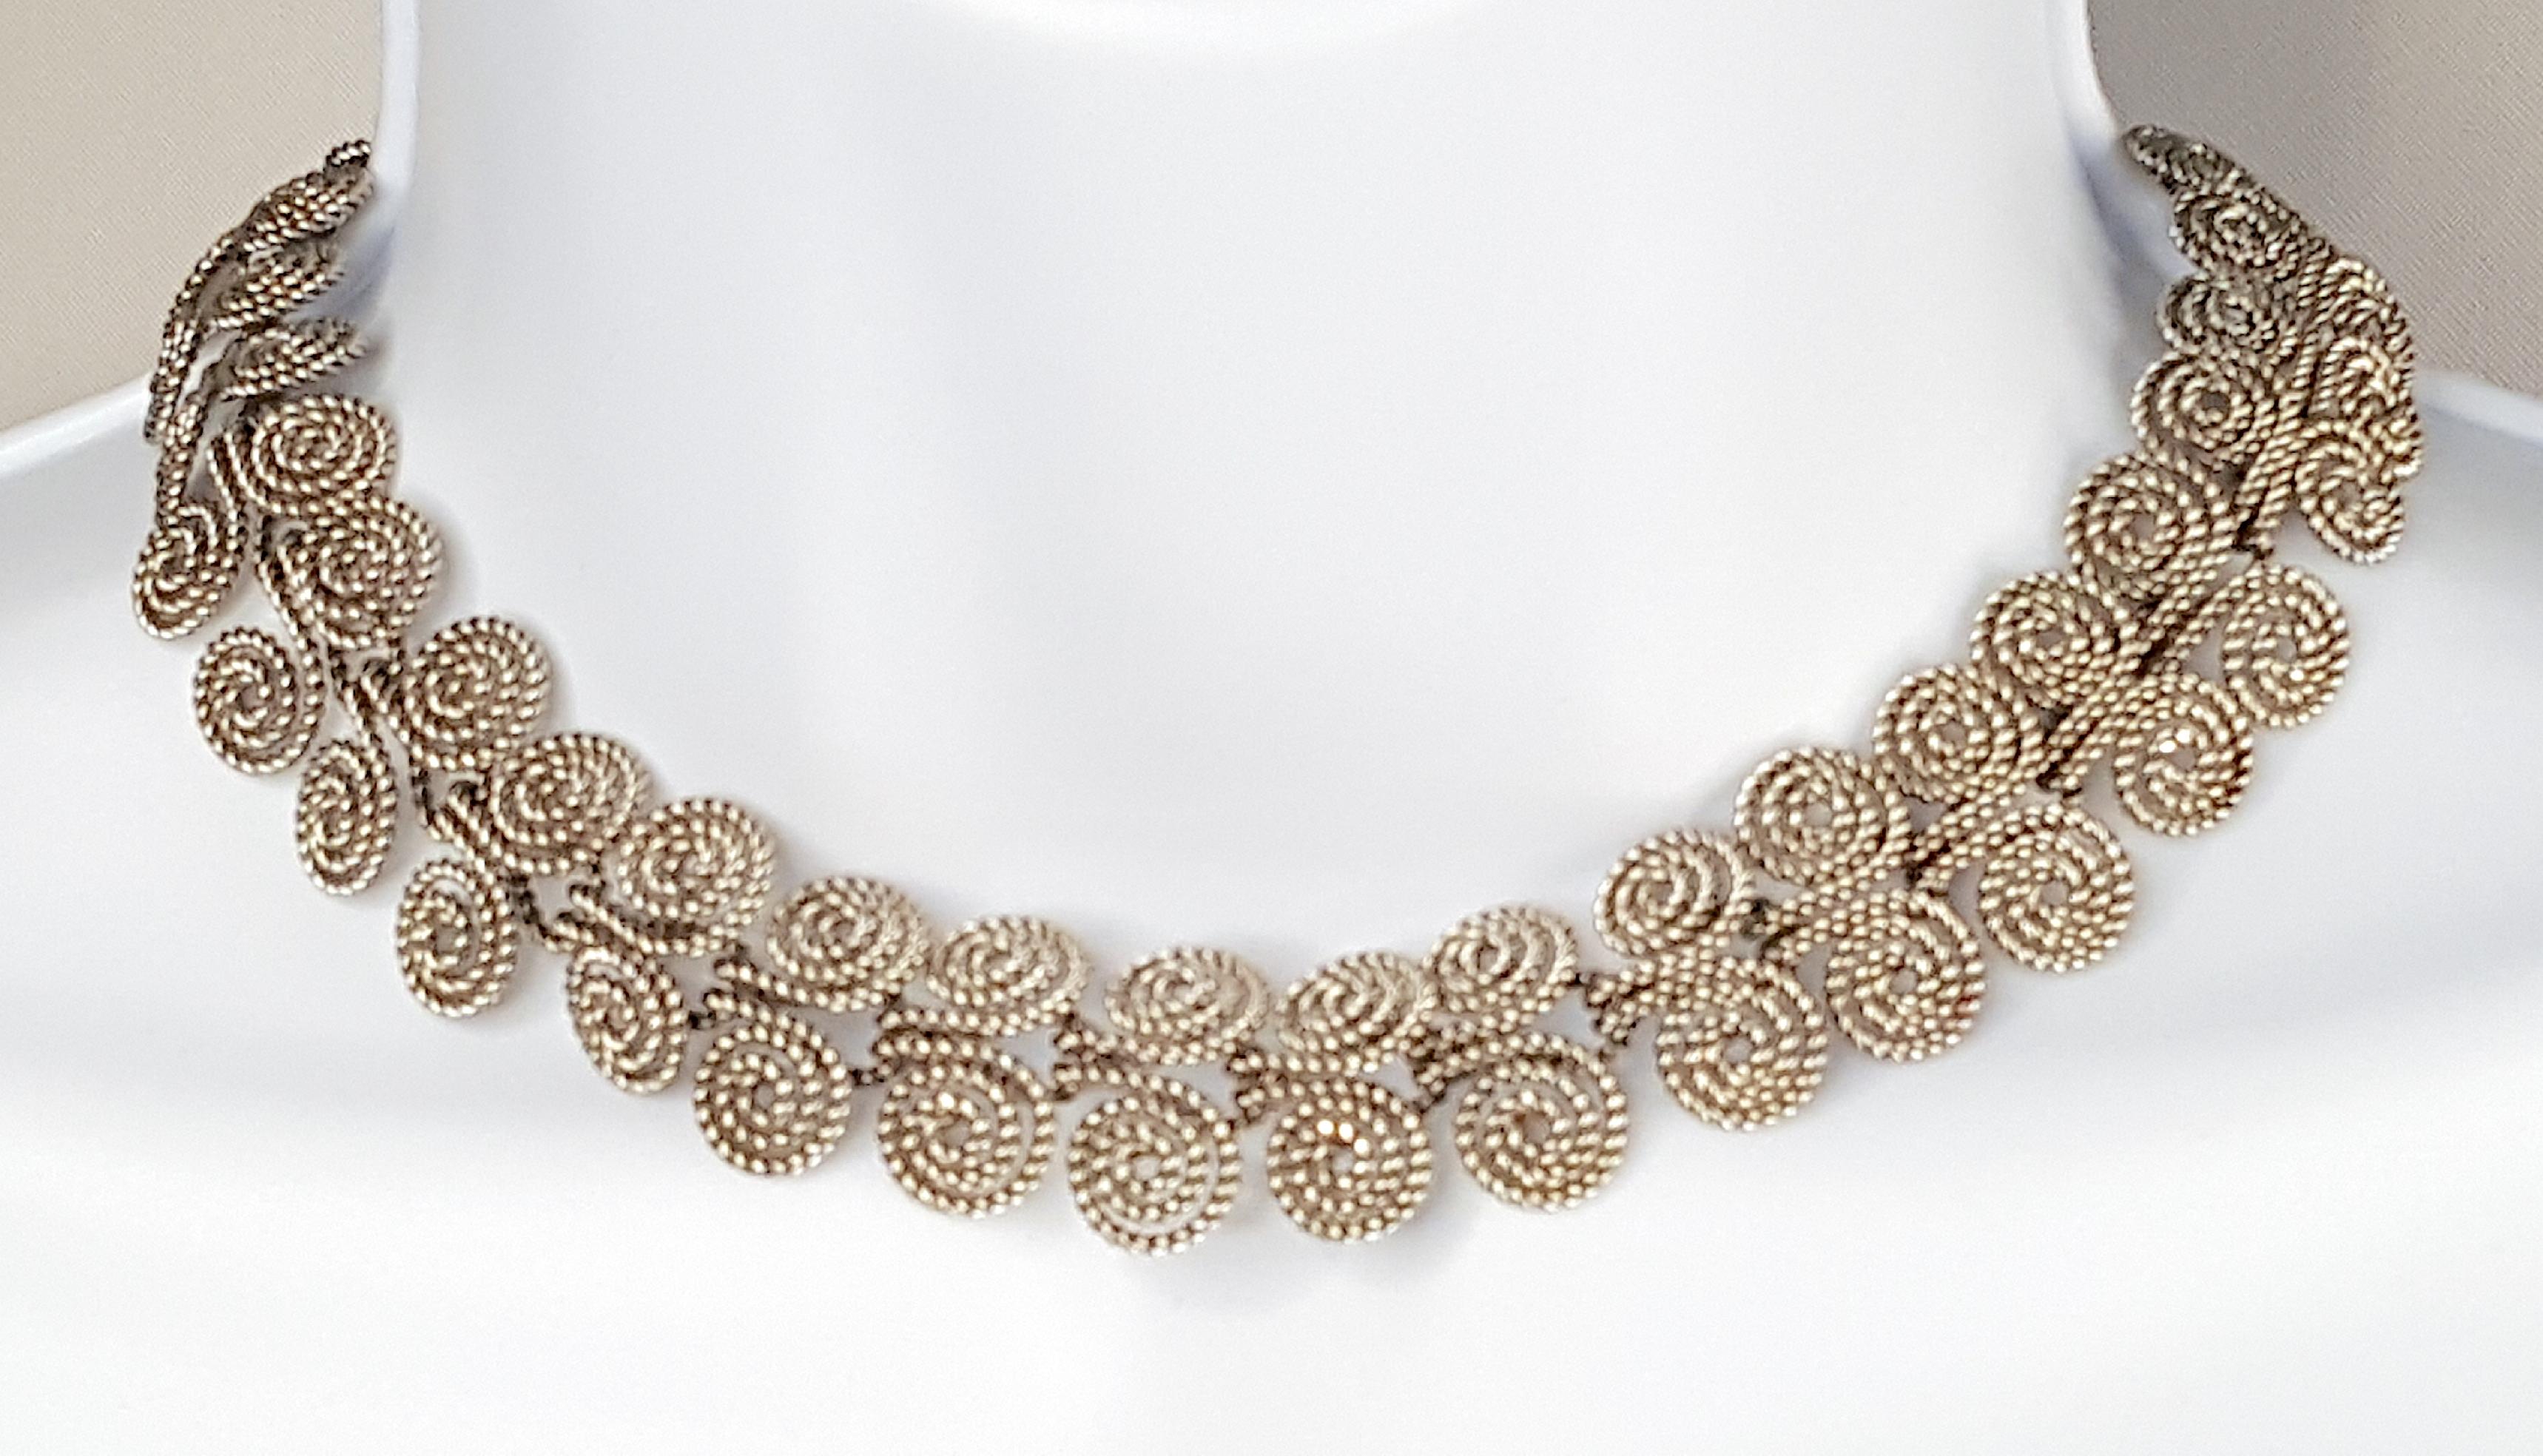 Featuring handmade double-spiral filigree links, this vintage collar choker necklace was created by tightly twisting fine silver wire, which was an artisan technique popular in the 1930s. The 34 links are virtually identical with the exception of